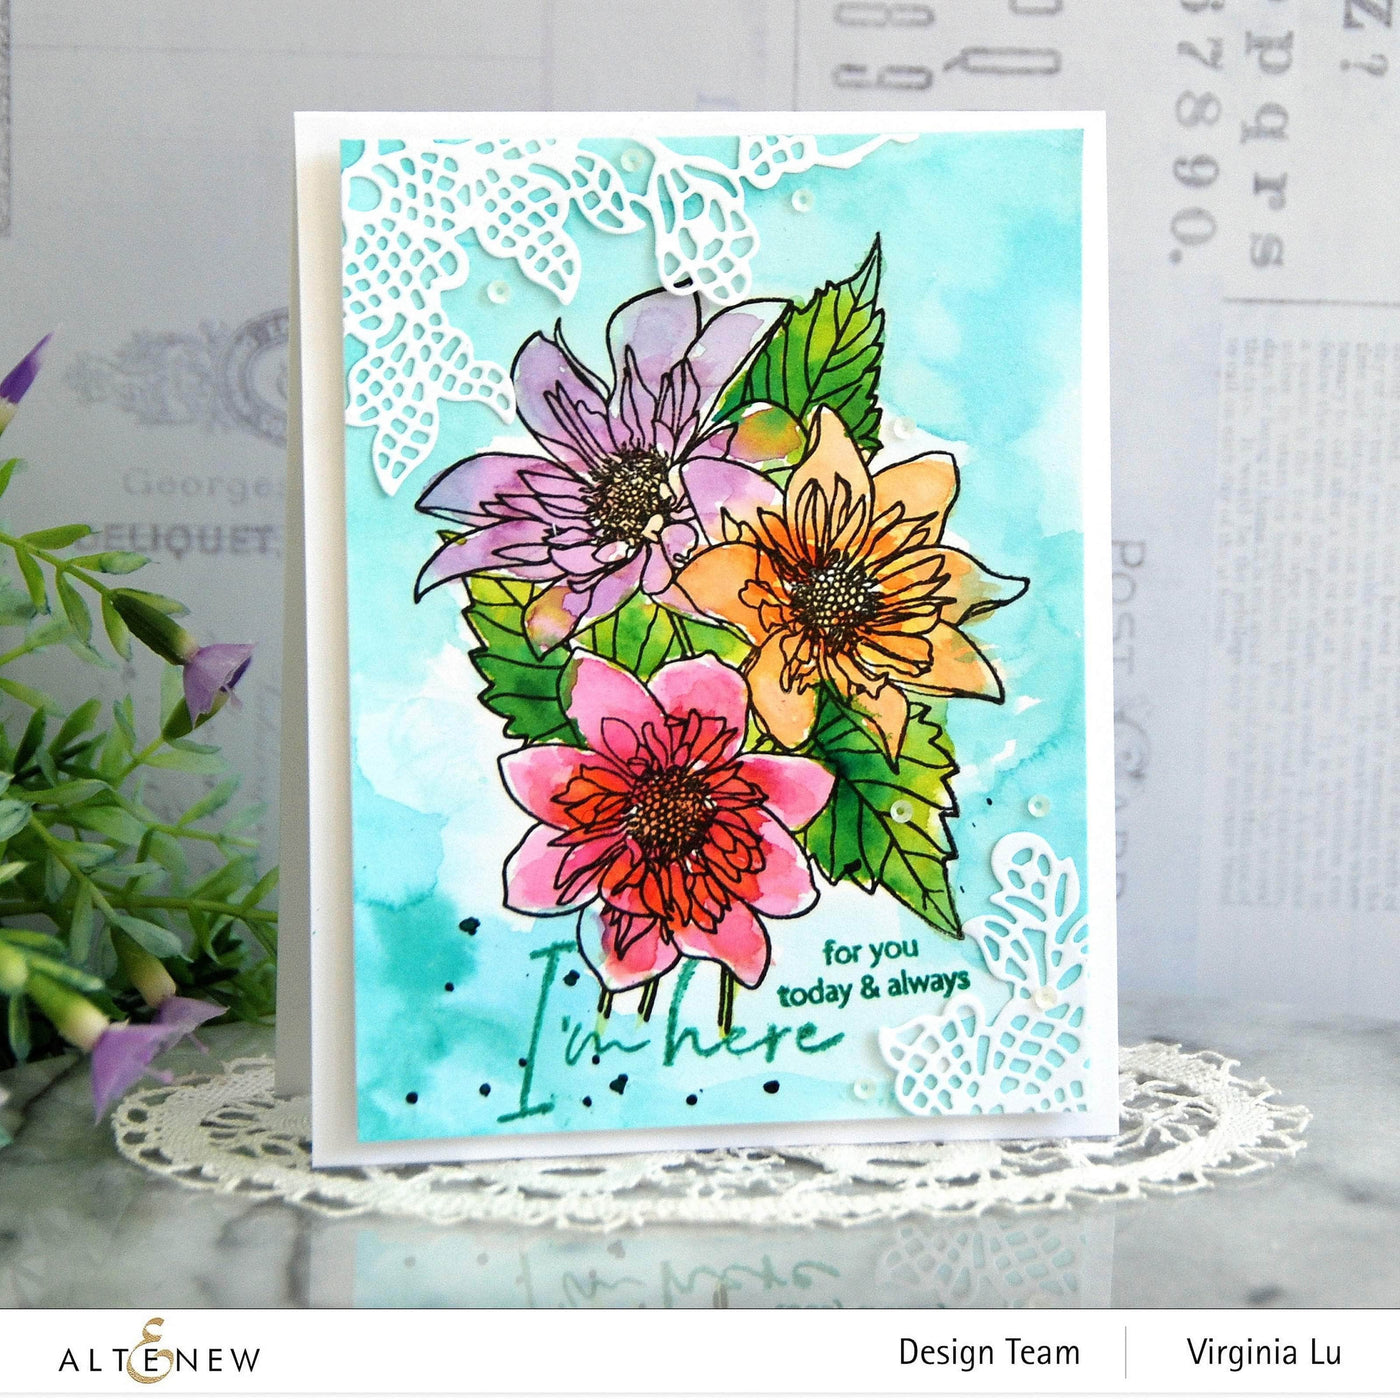 Clear Stamps Paint-A-Flower: Fashion Monger Dahlia Outline Stamp Set